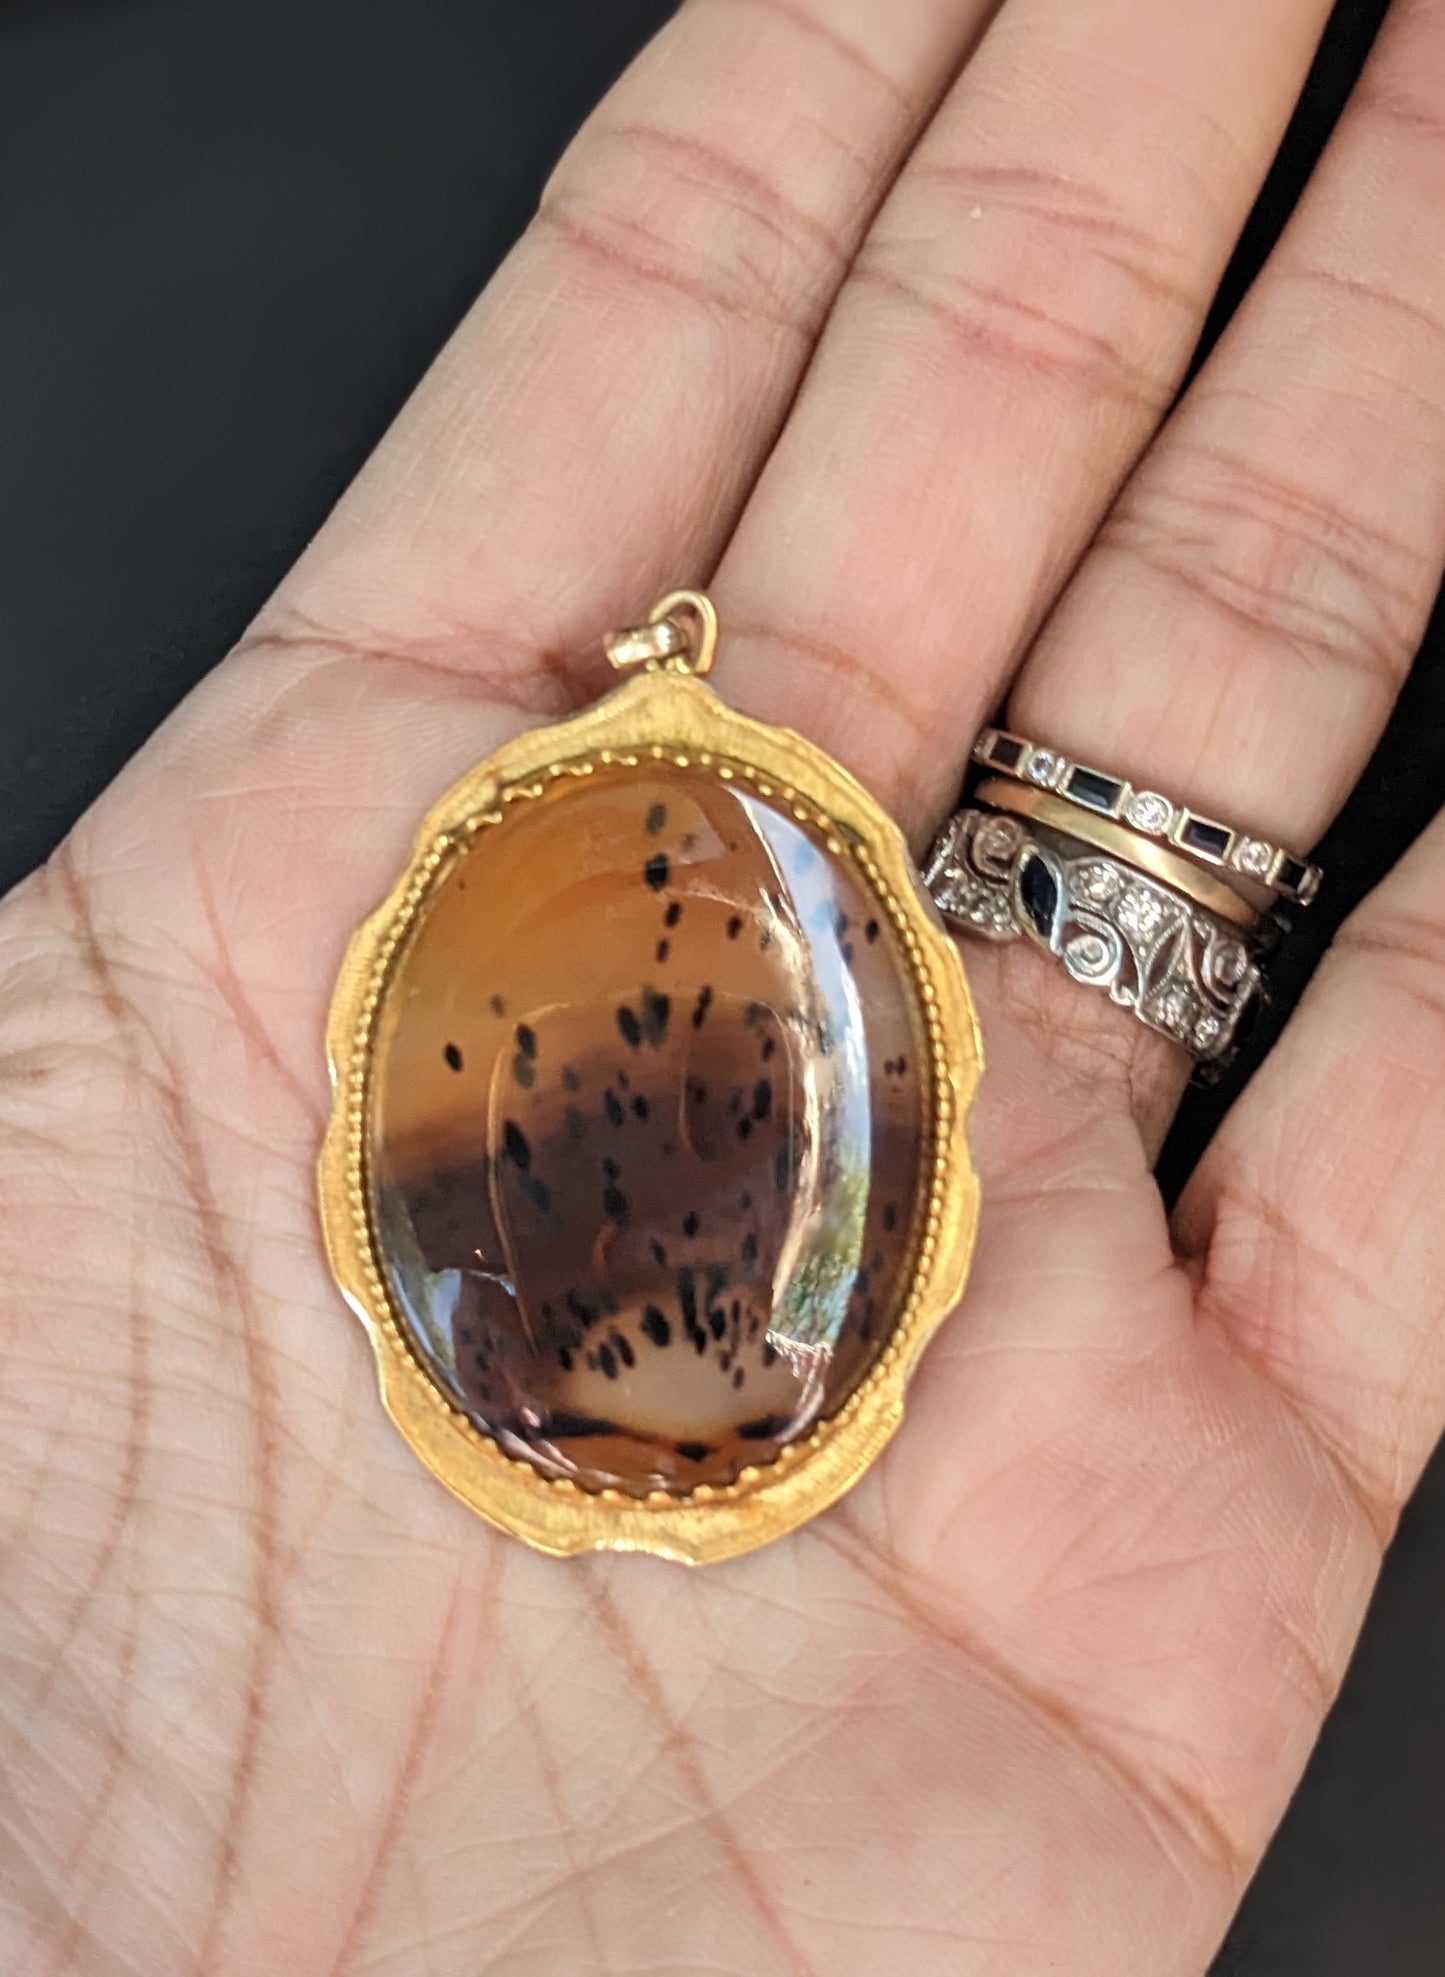 10Kt Agate Brooch and Pendant, banded with milgrained edge, Late 1800's with specks